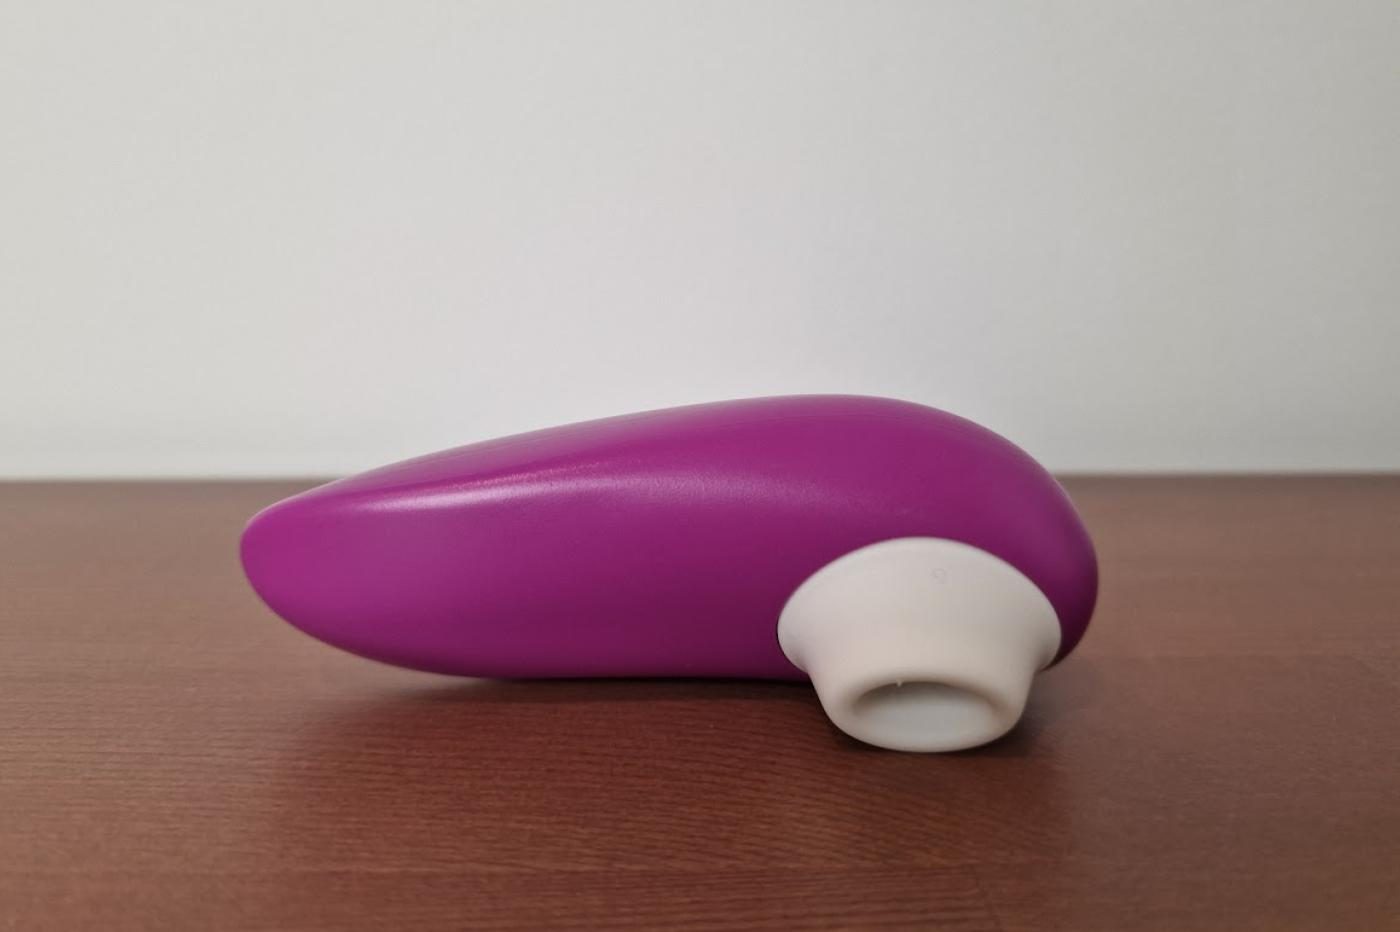 Our Selection To Choose Your First Sex Toy